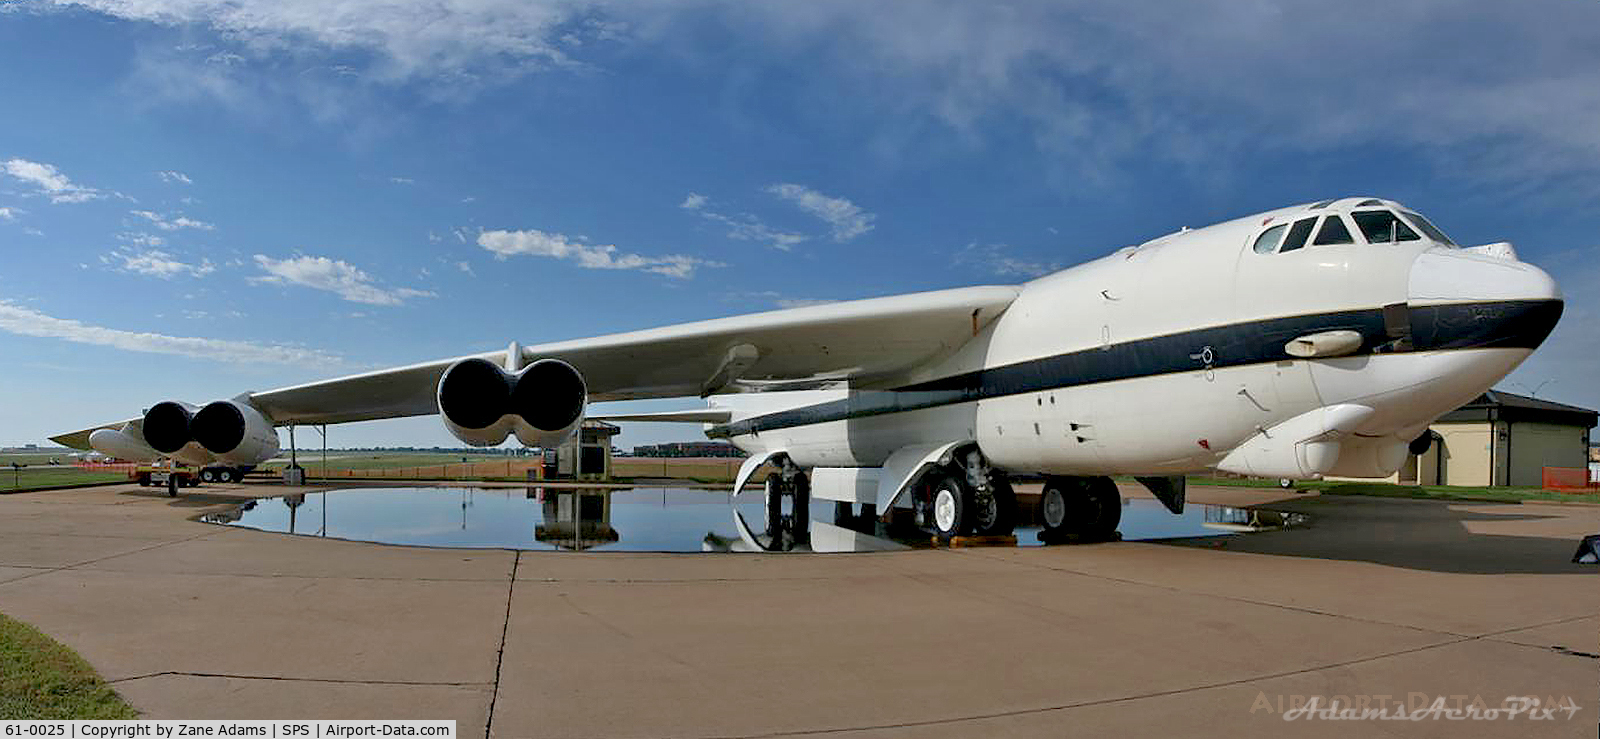 61-0025, 1961 Boeing B-52H Stratofortress C/N 464452, At the 2017 Sheppard AFB Airshow